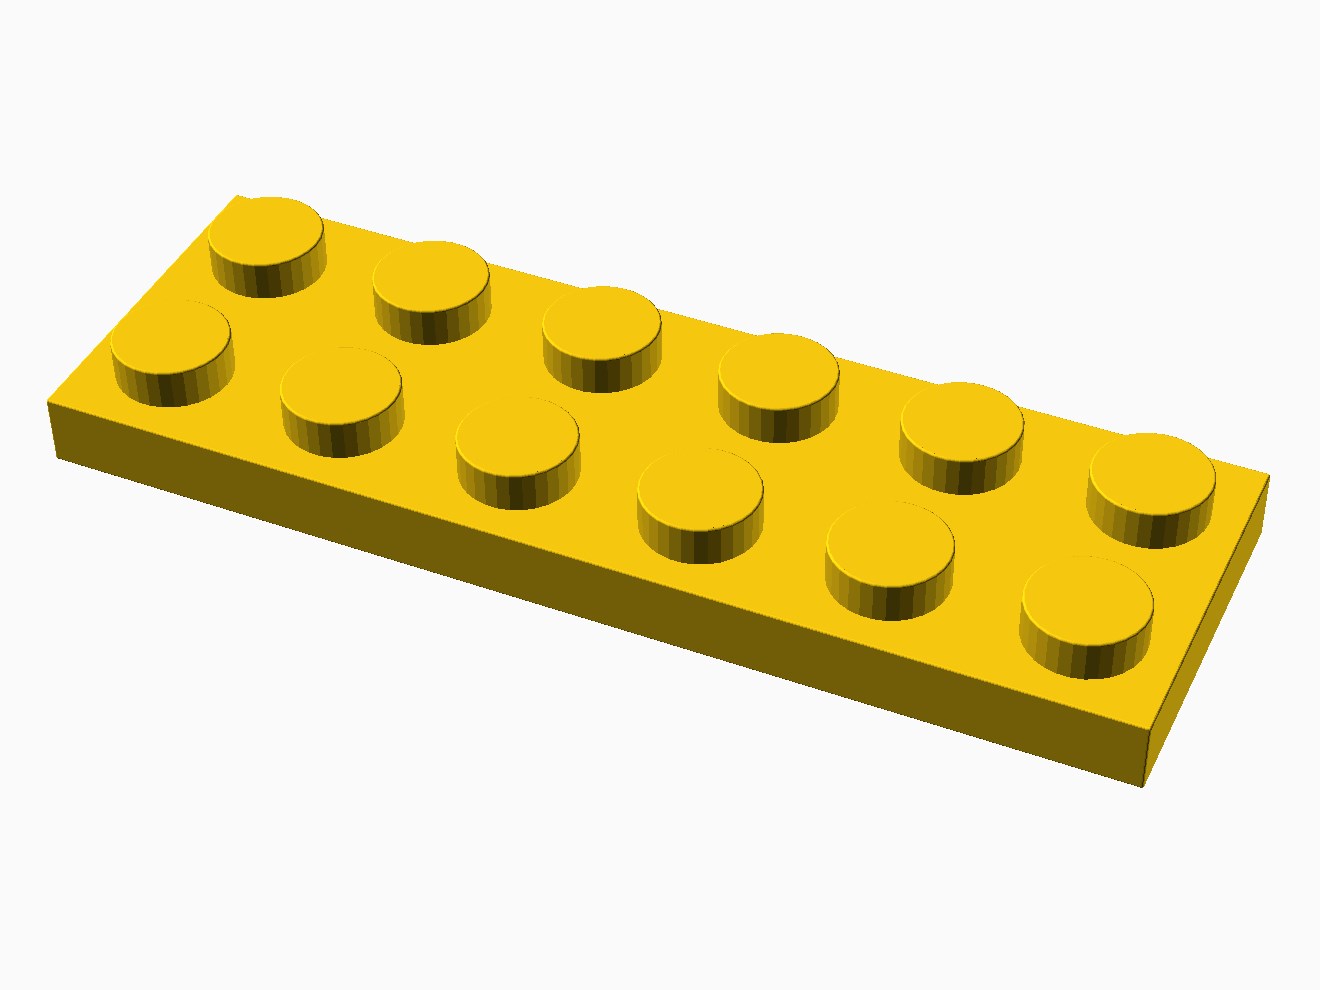 3D printable model of a LEGO 6x2 Plate with standard knobs.